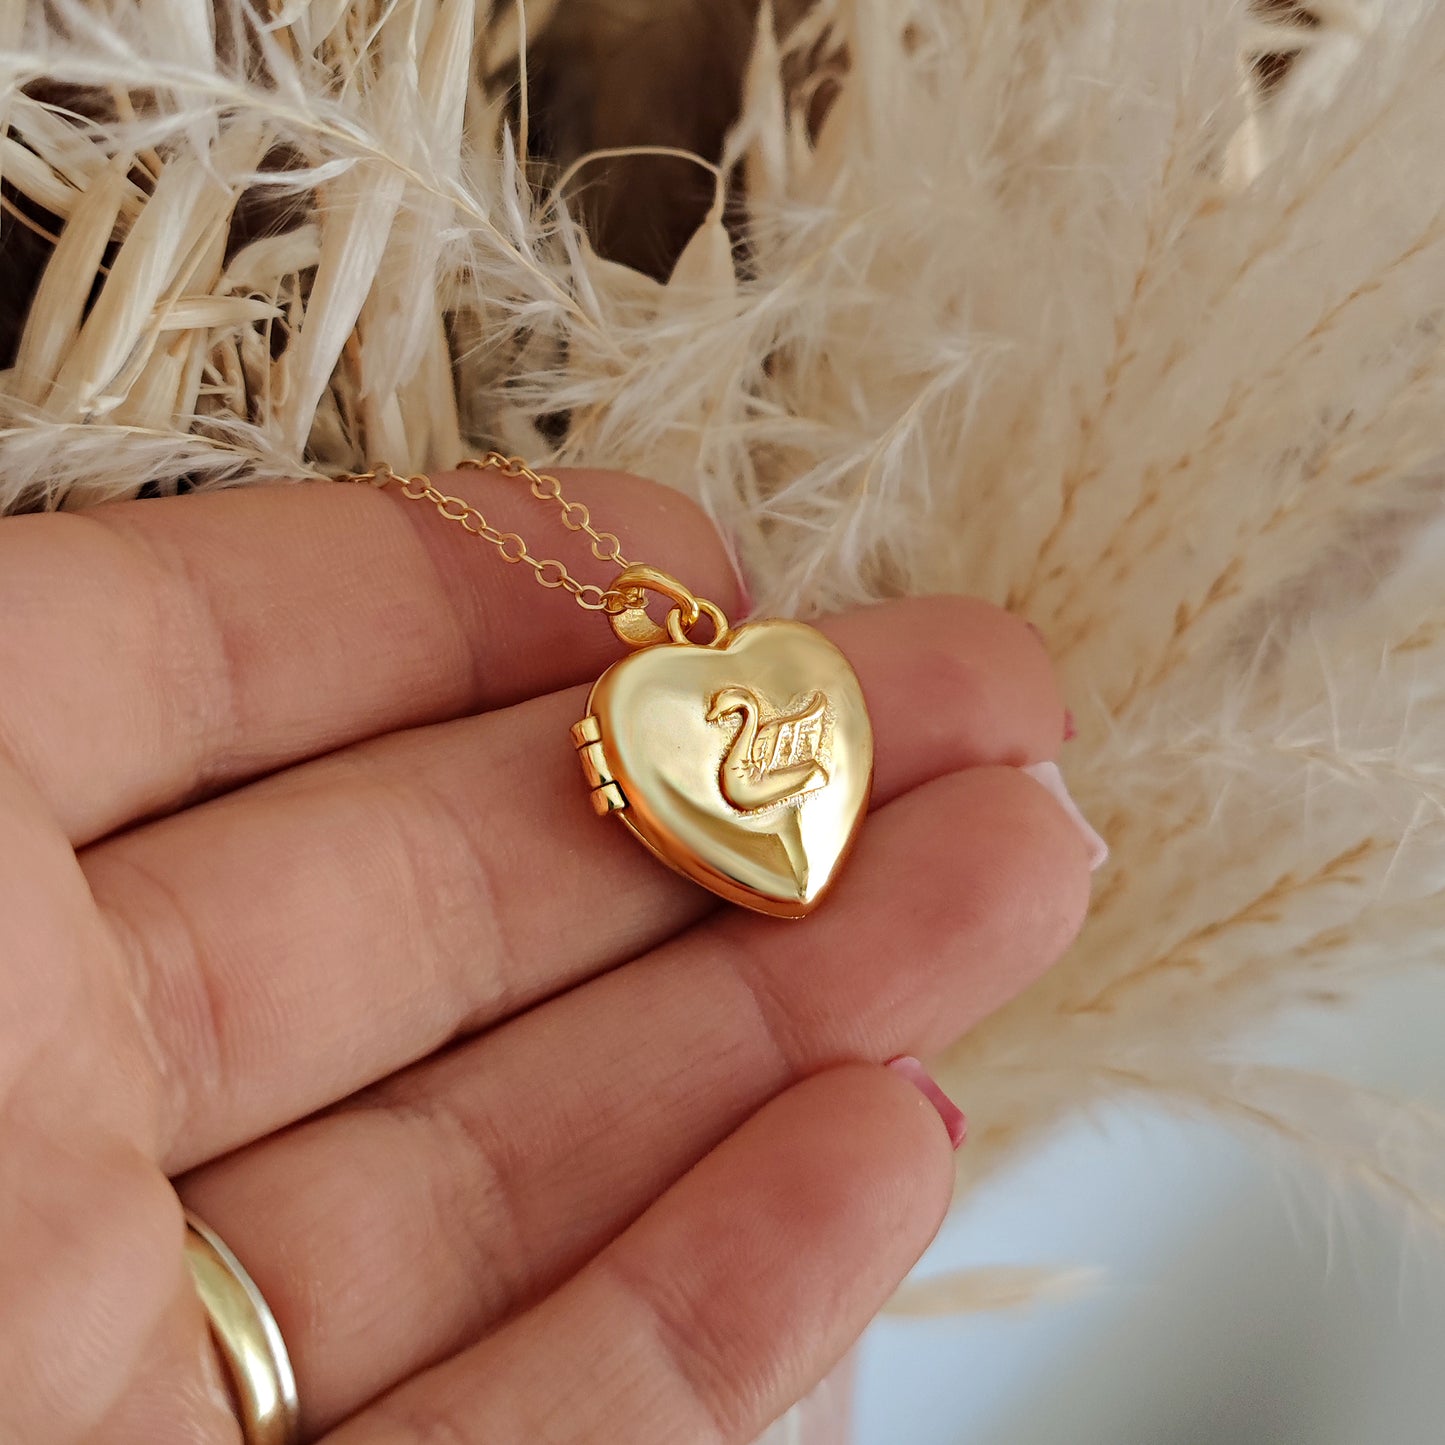 Swan Locket Necklace - SMALL gold plated brass